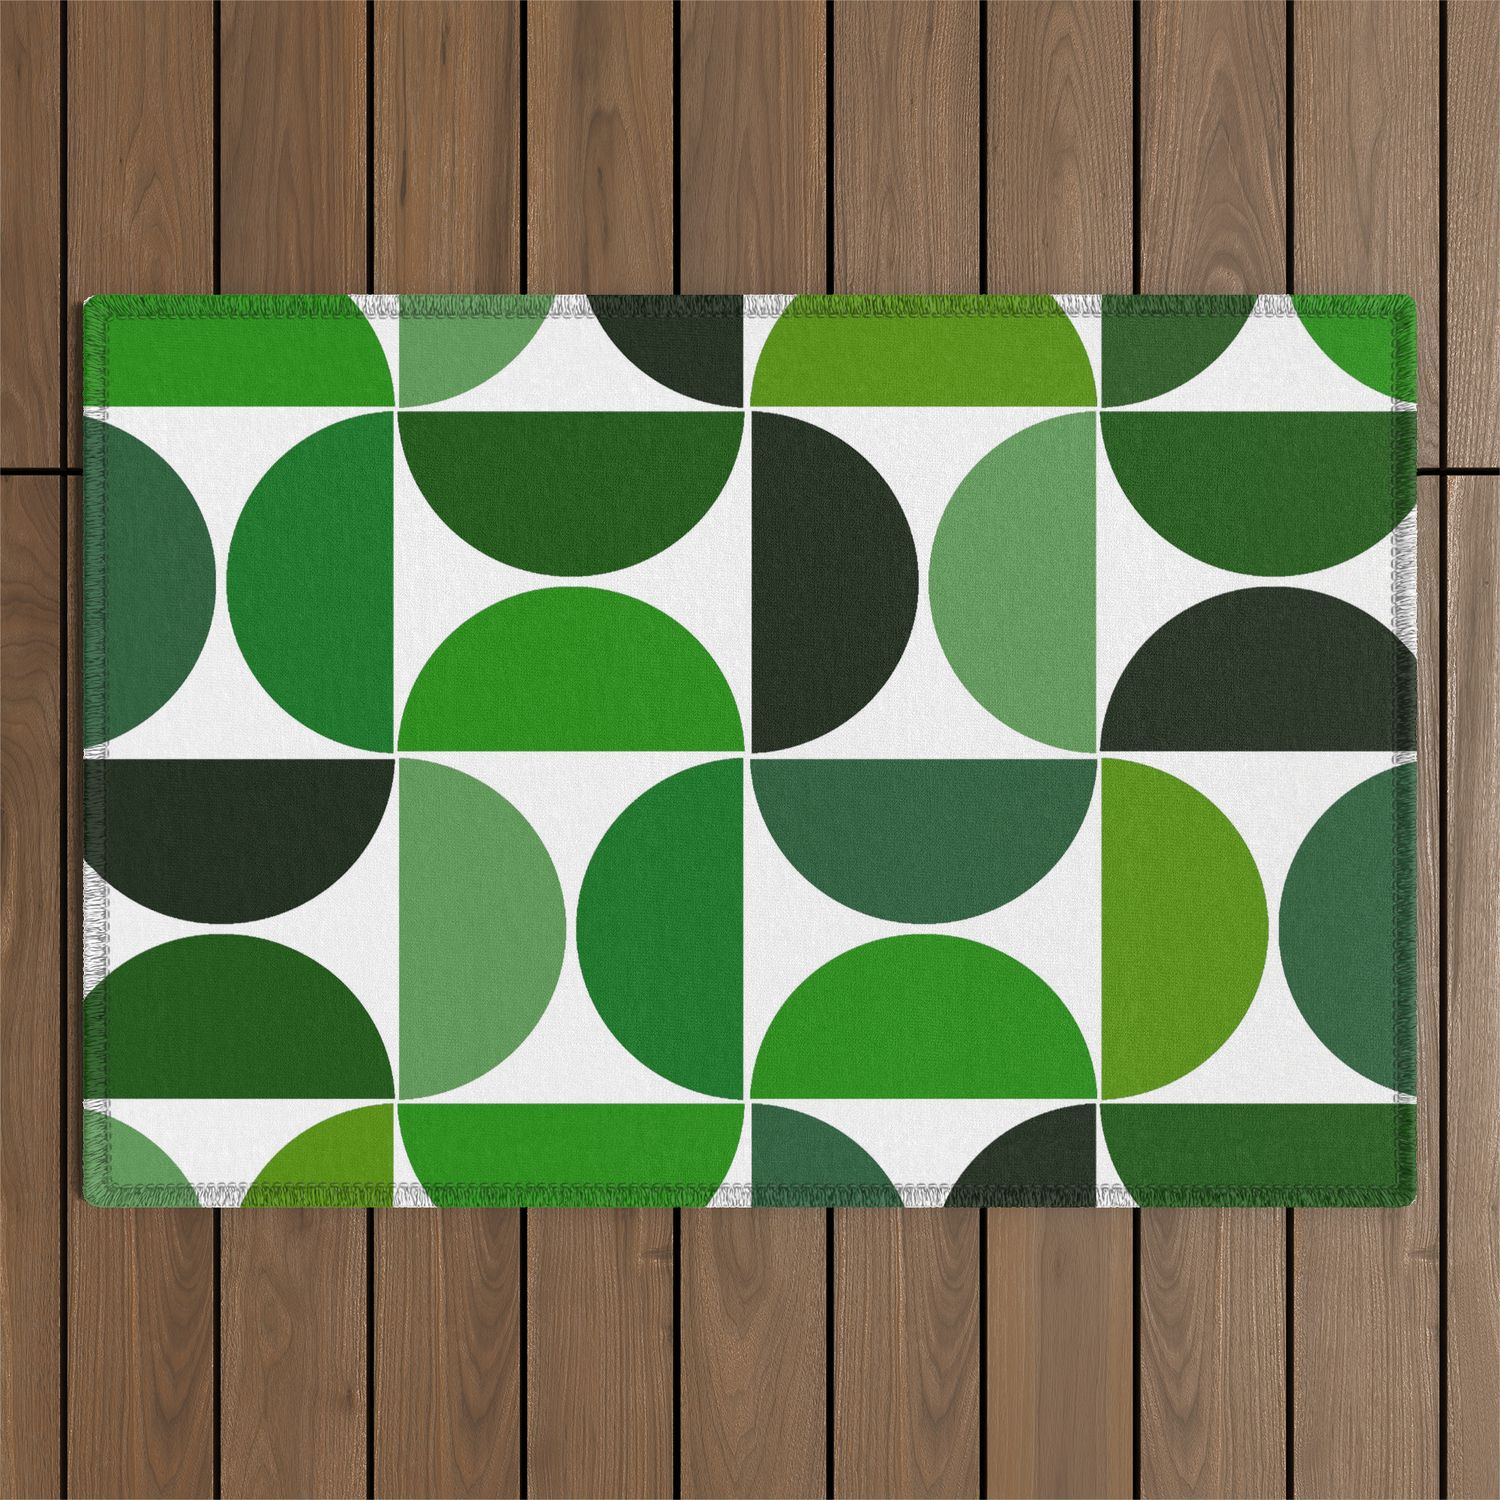 Mid Century Modern Geometric Green Outdoor Rugartstudio88Design |  Society6 Intended For Green Outdoor Rugs (View 7 of 15)